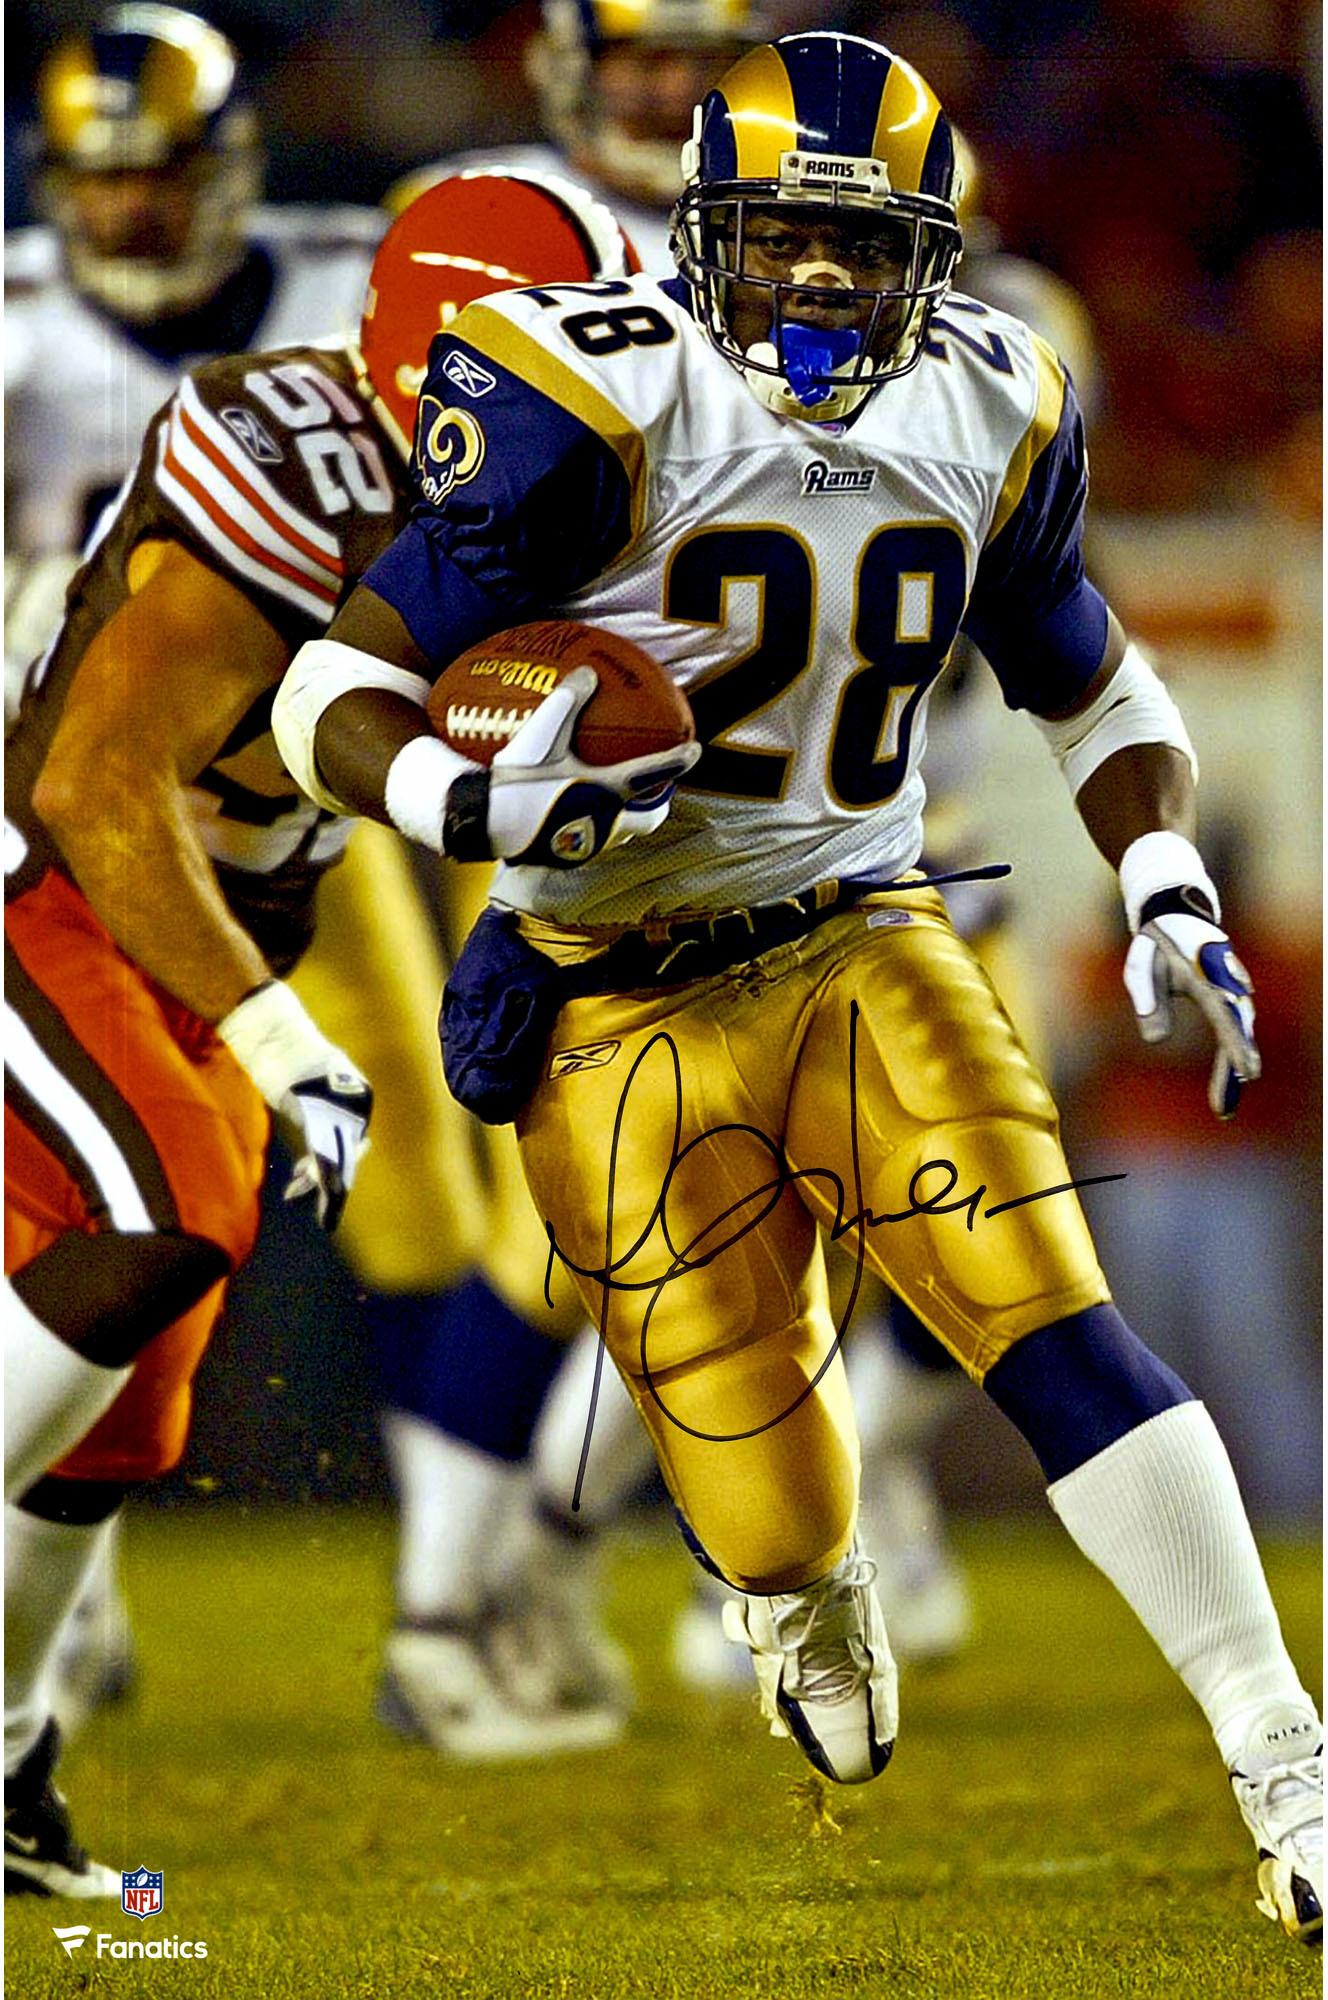 Marshall Faulk St. Louis Rams Autographed 16 x 20 Running Photograph Authentic Certified